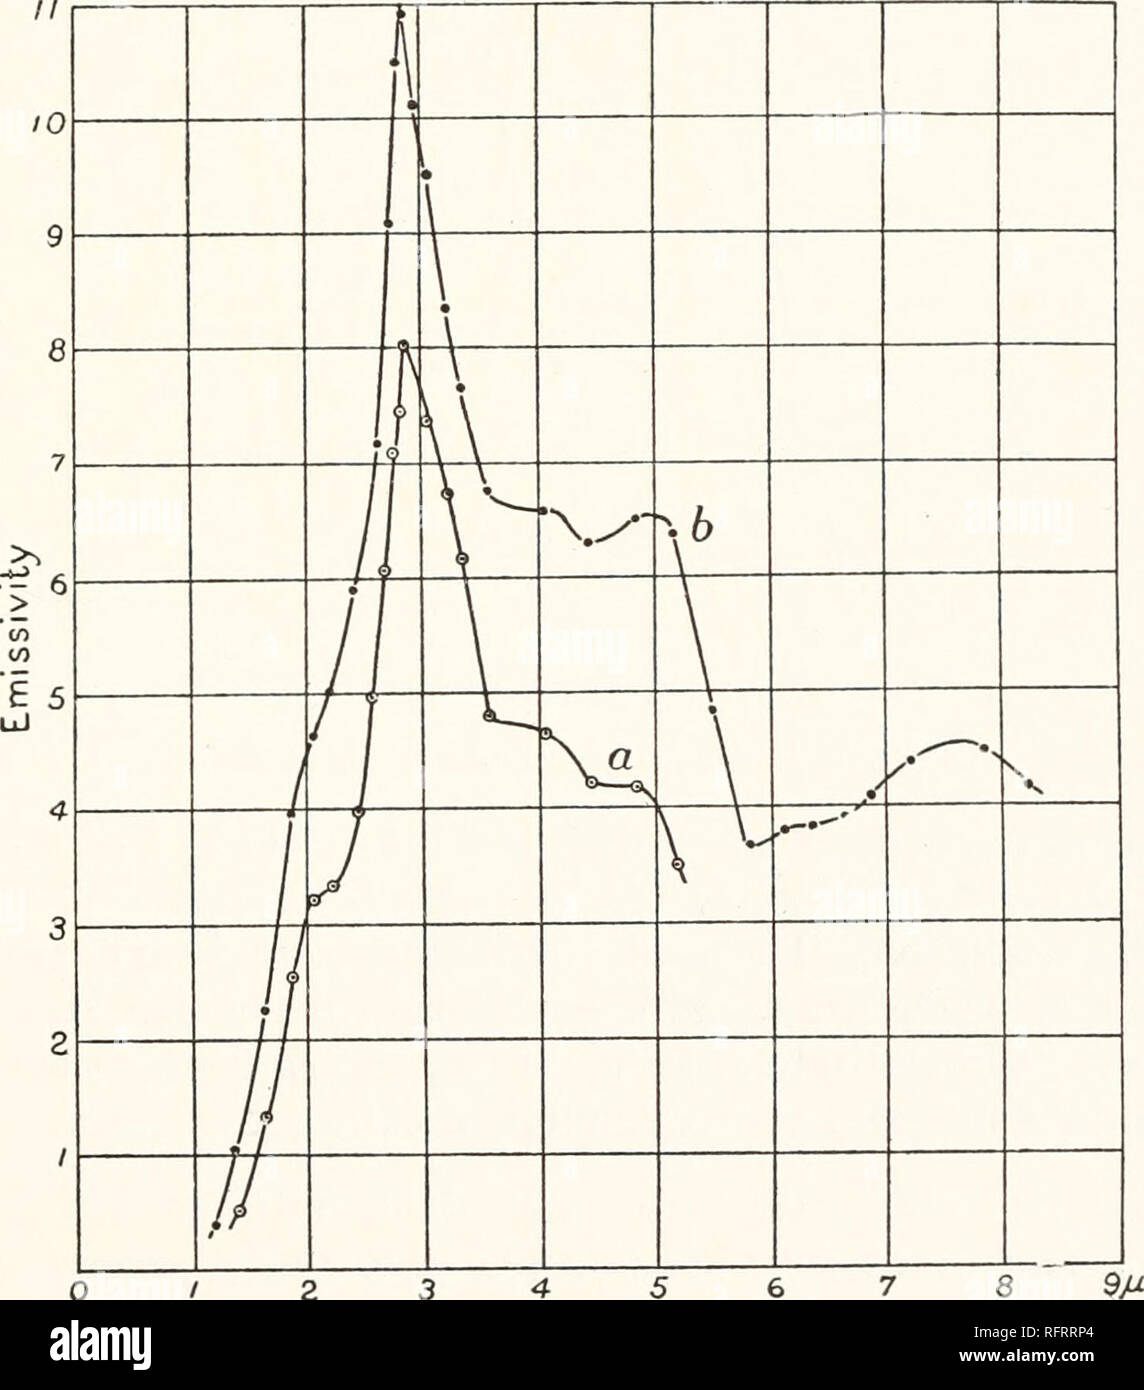 . Carnegie Institution of Washington publication. ERBIUM OXIDE. 117 yttrium oxide, of unknown purity, all of which were a beautiful yellow color, as compared with the sample given in fig. 83, which was a yellowish- white. These samples were obtained by fractional precipitation from the sulphate of yttrium by means of oxalic acid. The precipitation, however, was not carried out to the extent of obtaining yttrium, erbium, and ytter- bium oxides separately. In these curves the prominent bands of fig. 83, with maxima at 2 and 2.75 fi, are suppressed, and the small bands of the latter at 3 and 6.8  Stock Photo